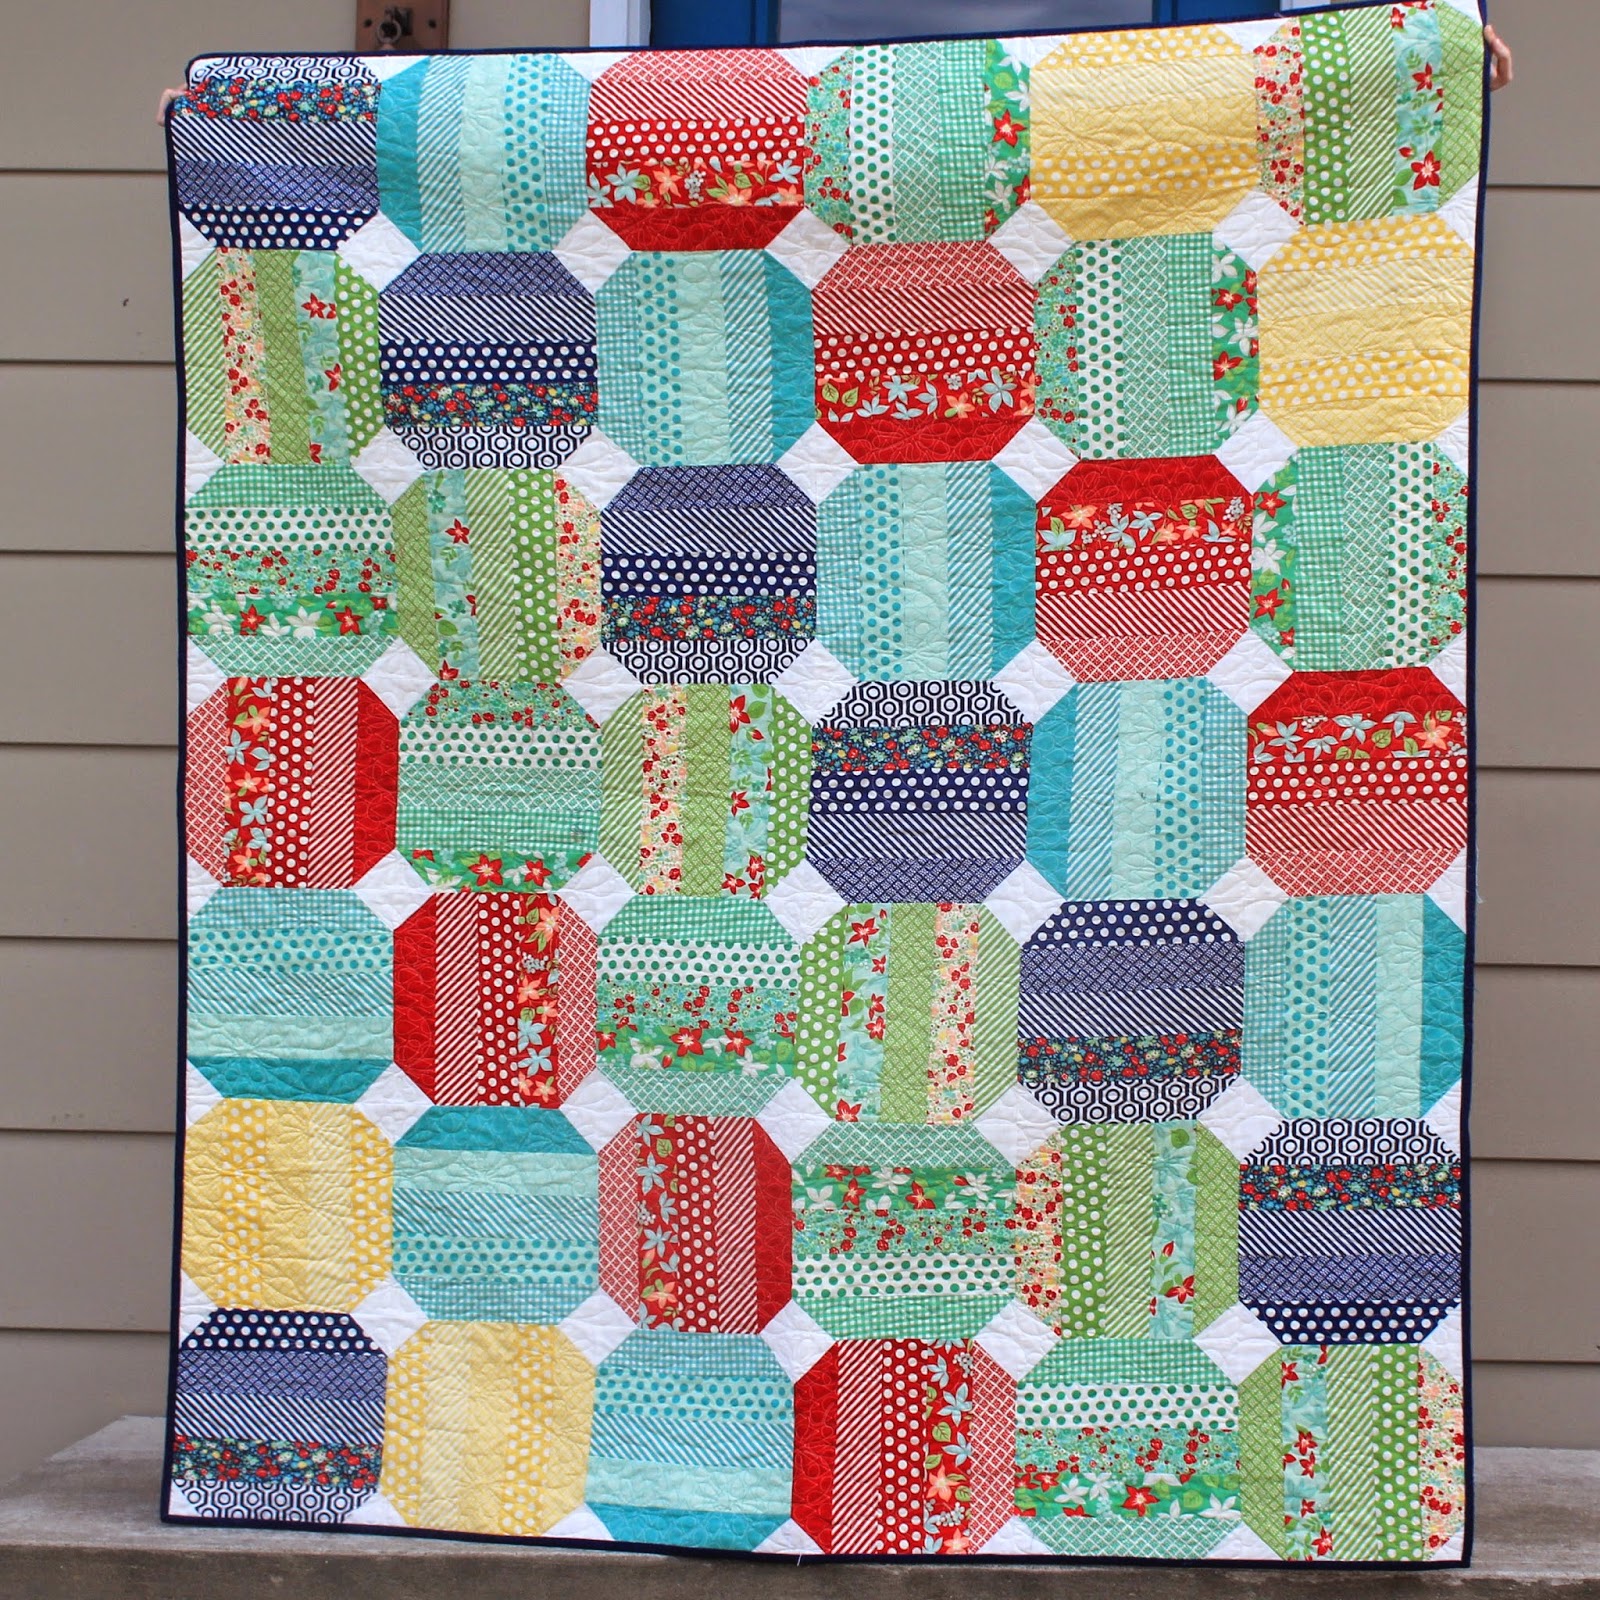 Jelly roll quilt using Moda's April Showers